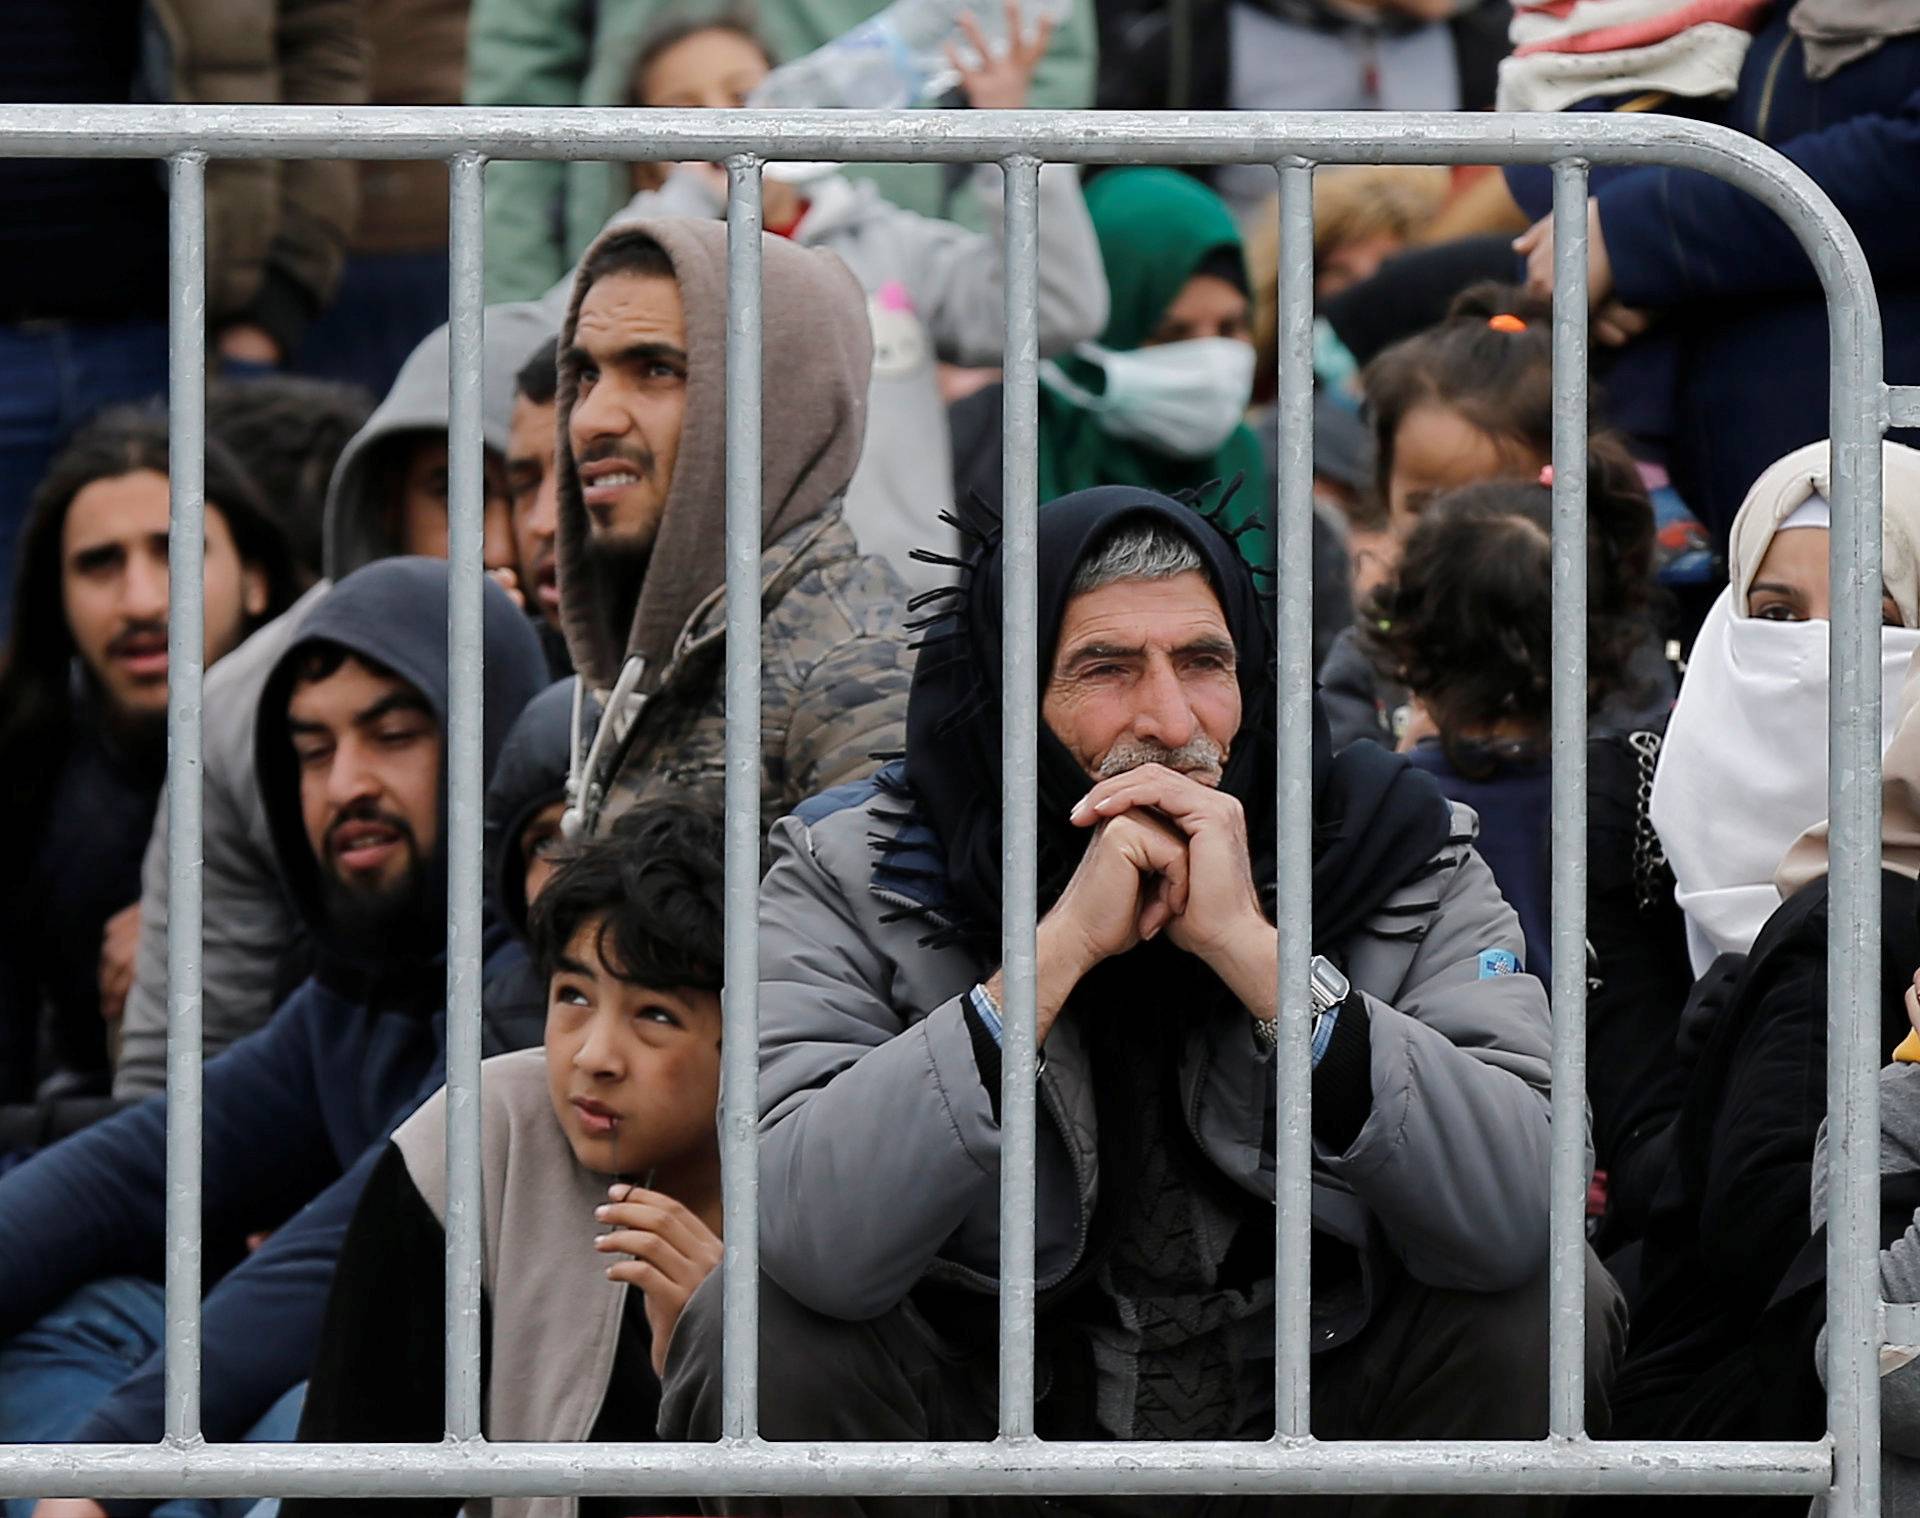 Migrants who arrived on the island of Lesbos in the past four days, are seen at the port of Mytilene, as they wait to board a Greek navy ship, in Mytilene